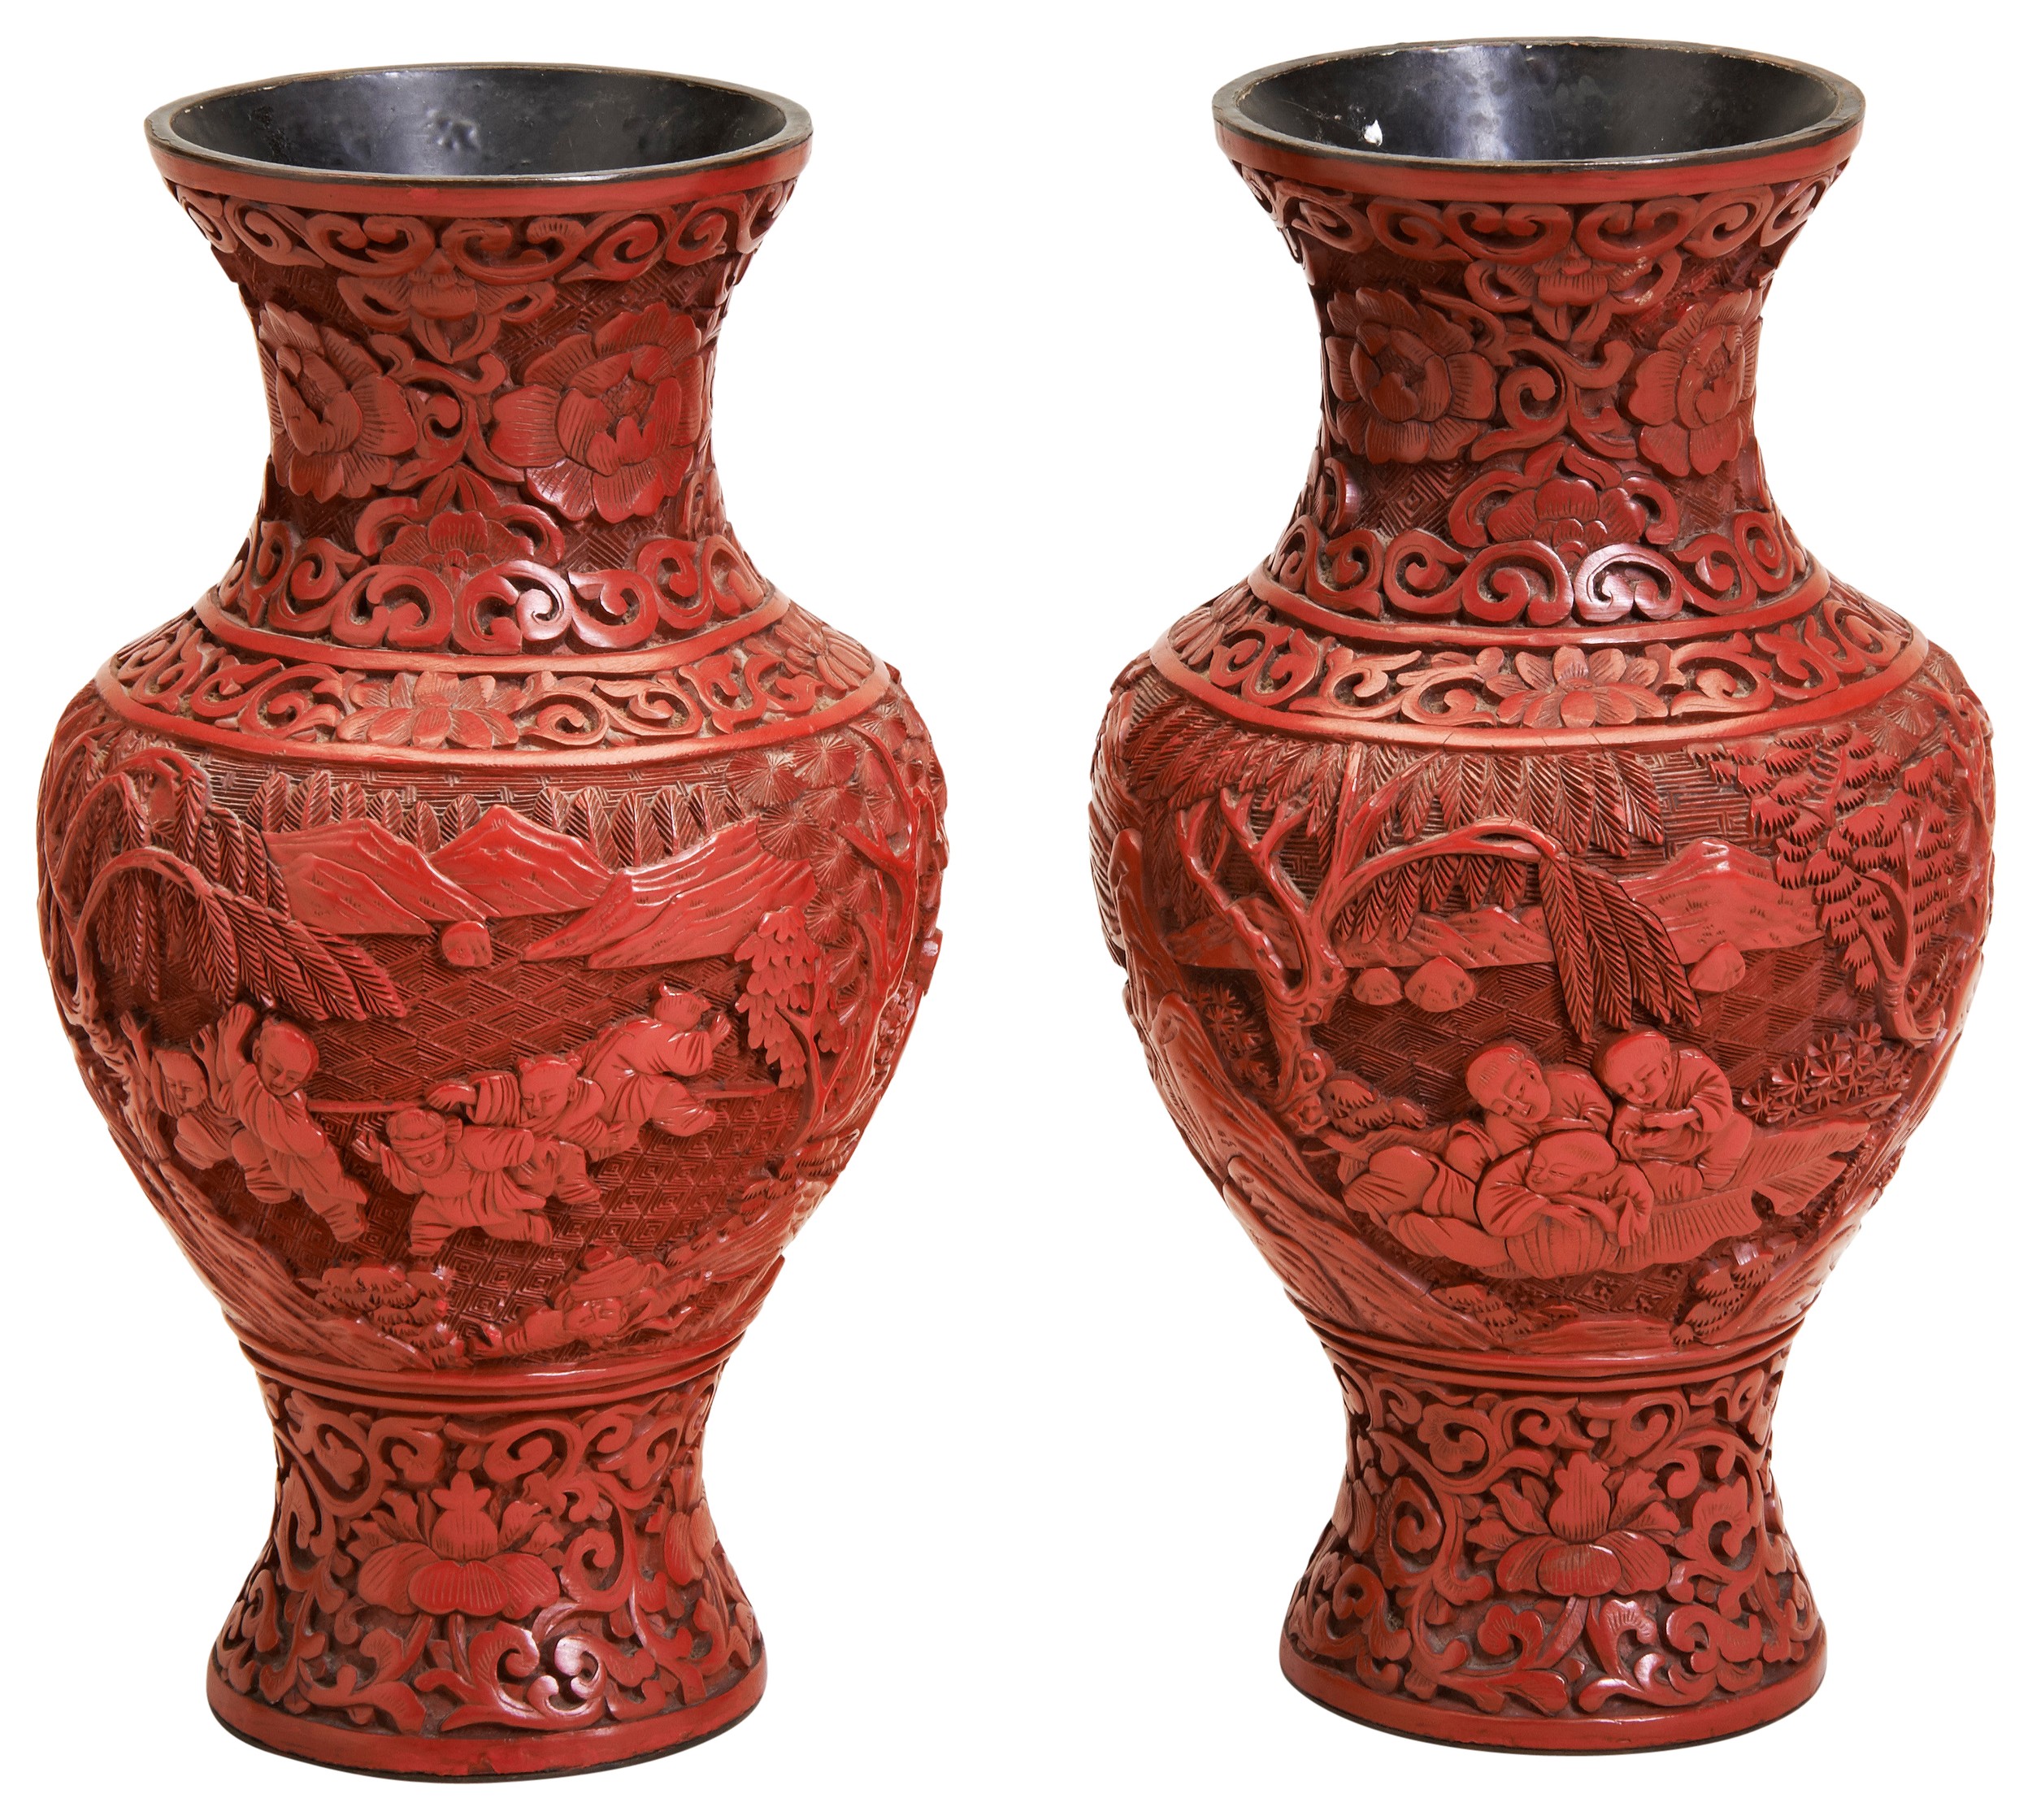 A PAIR OF CINNABAR LACQUER VASES LATE QING DYNASTY the baluster sides deeply carved with playful